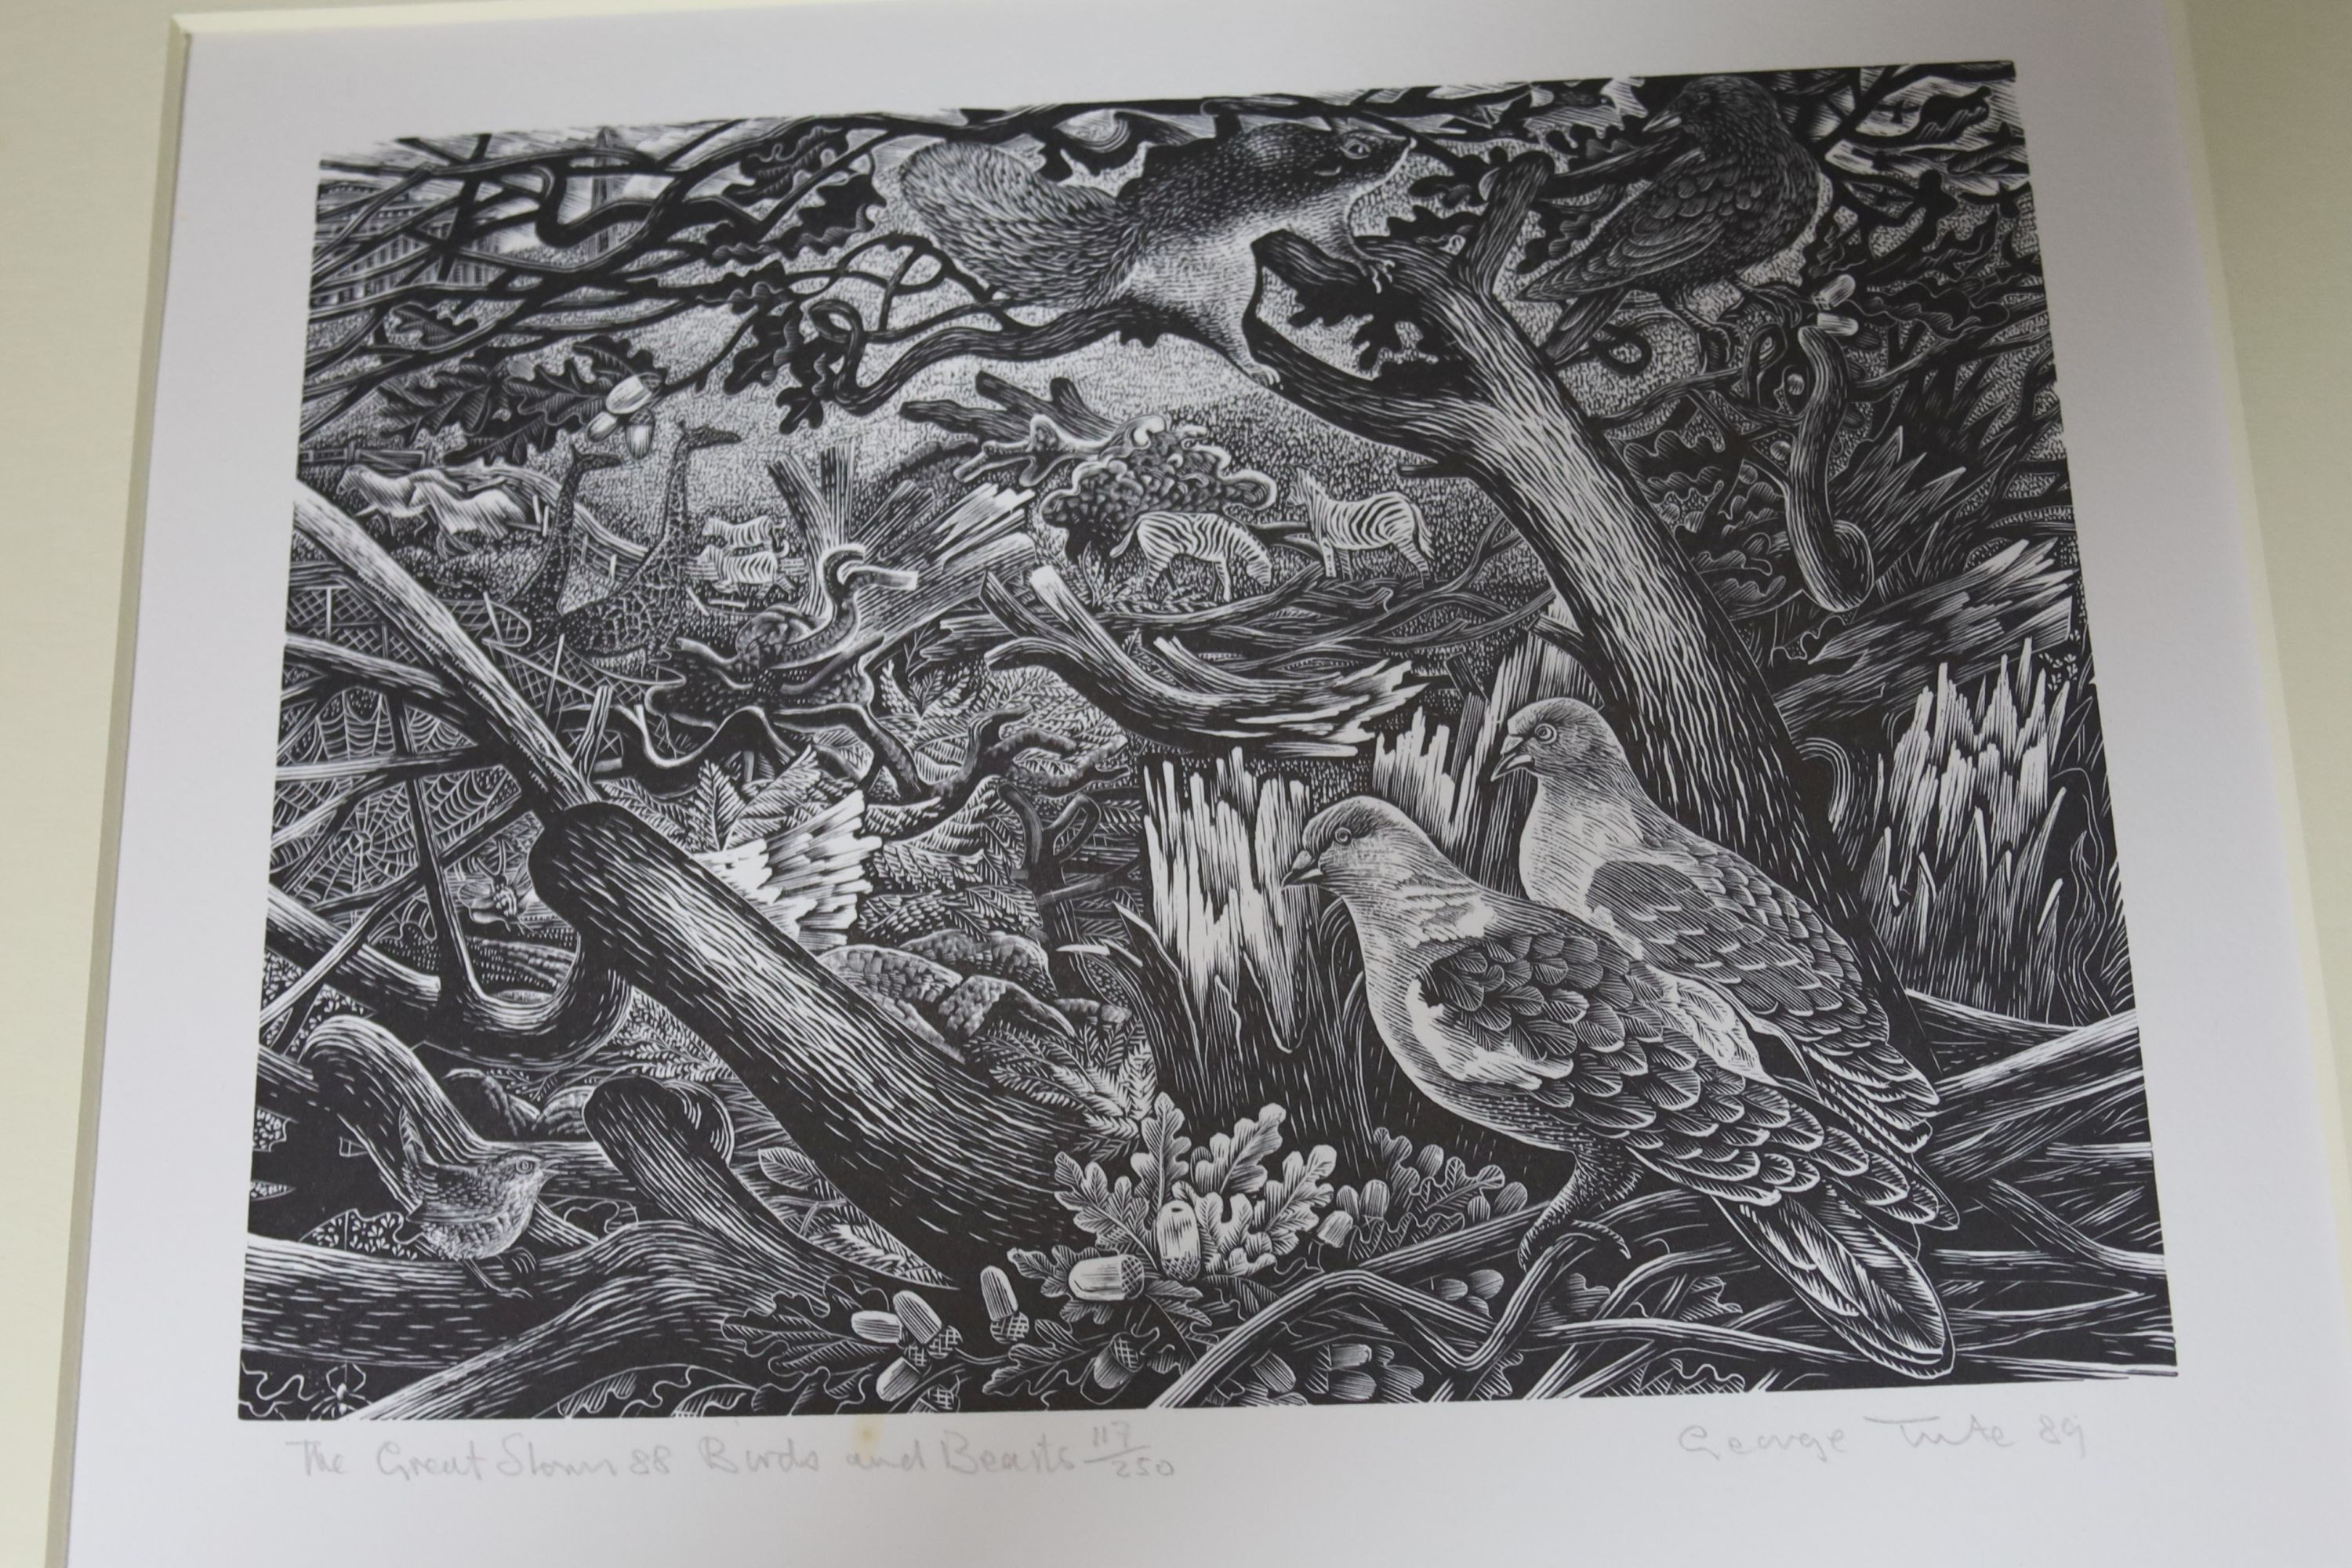 Society of Wood Engravers. Great Storm (The) of October 1987 and its aftermath: Five Wood Engravings..., number 117 of 250 copies